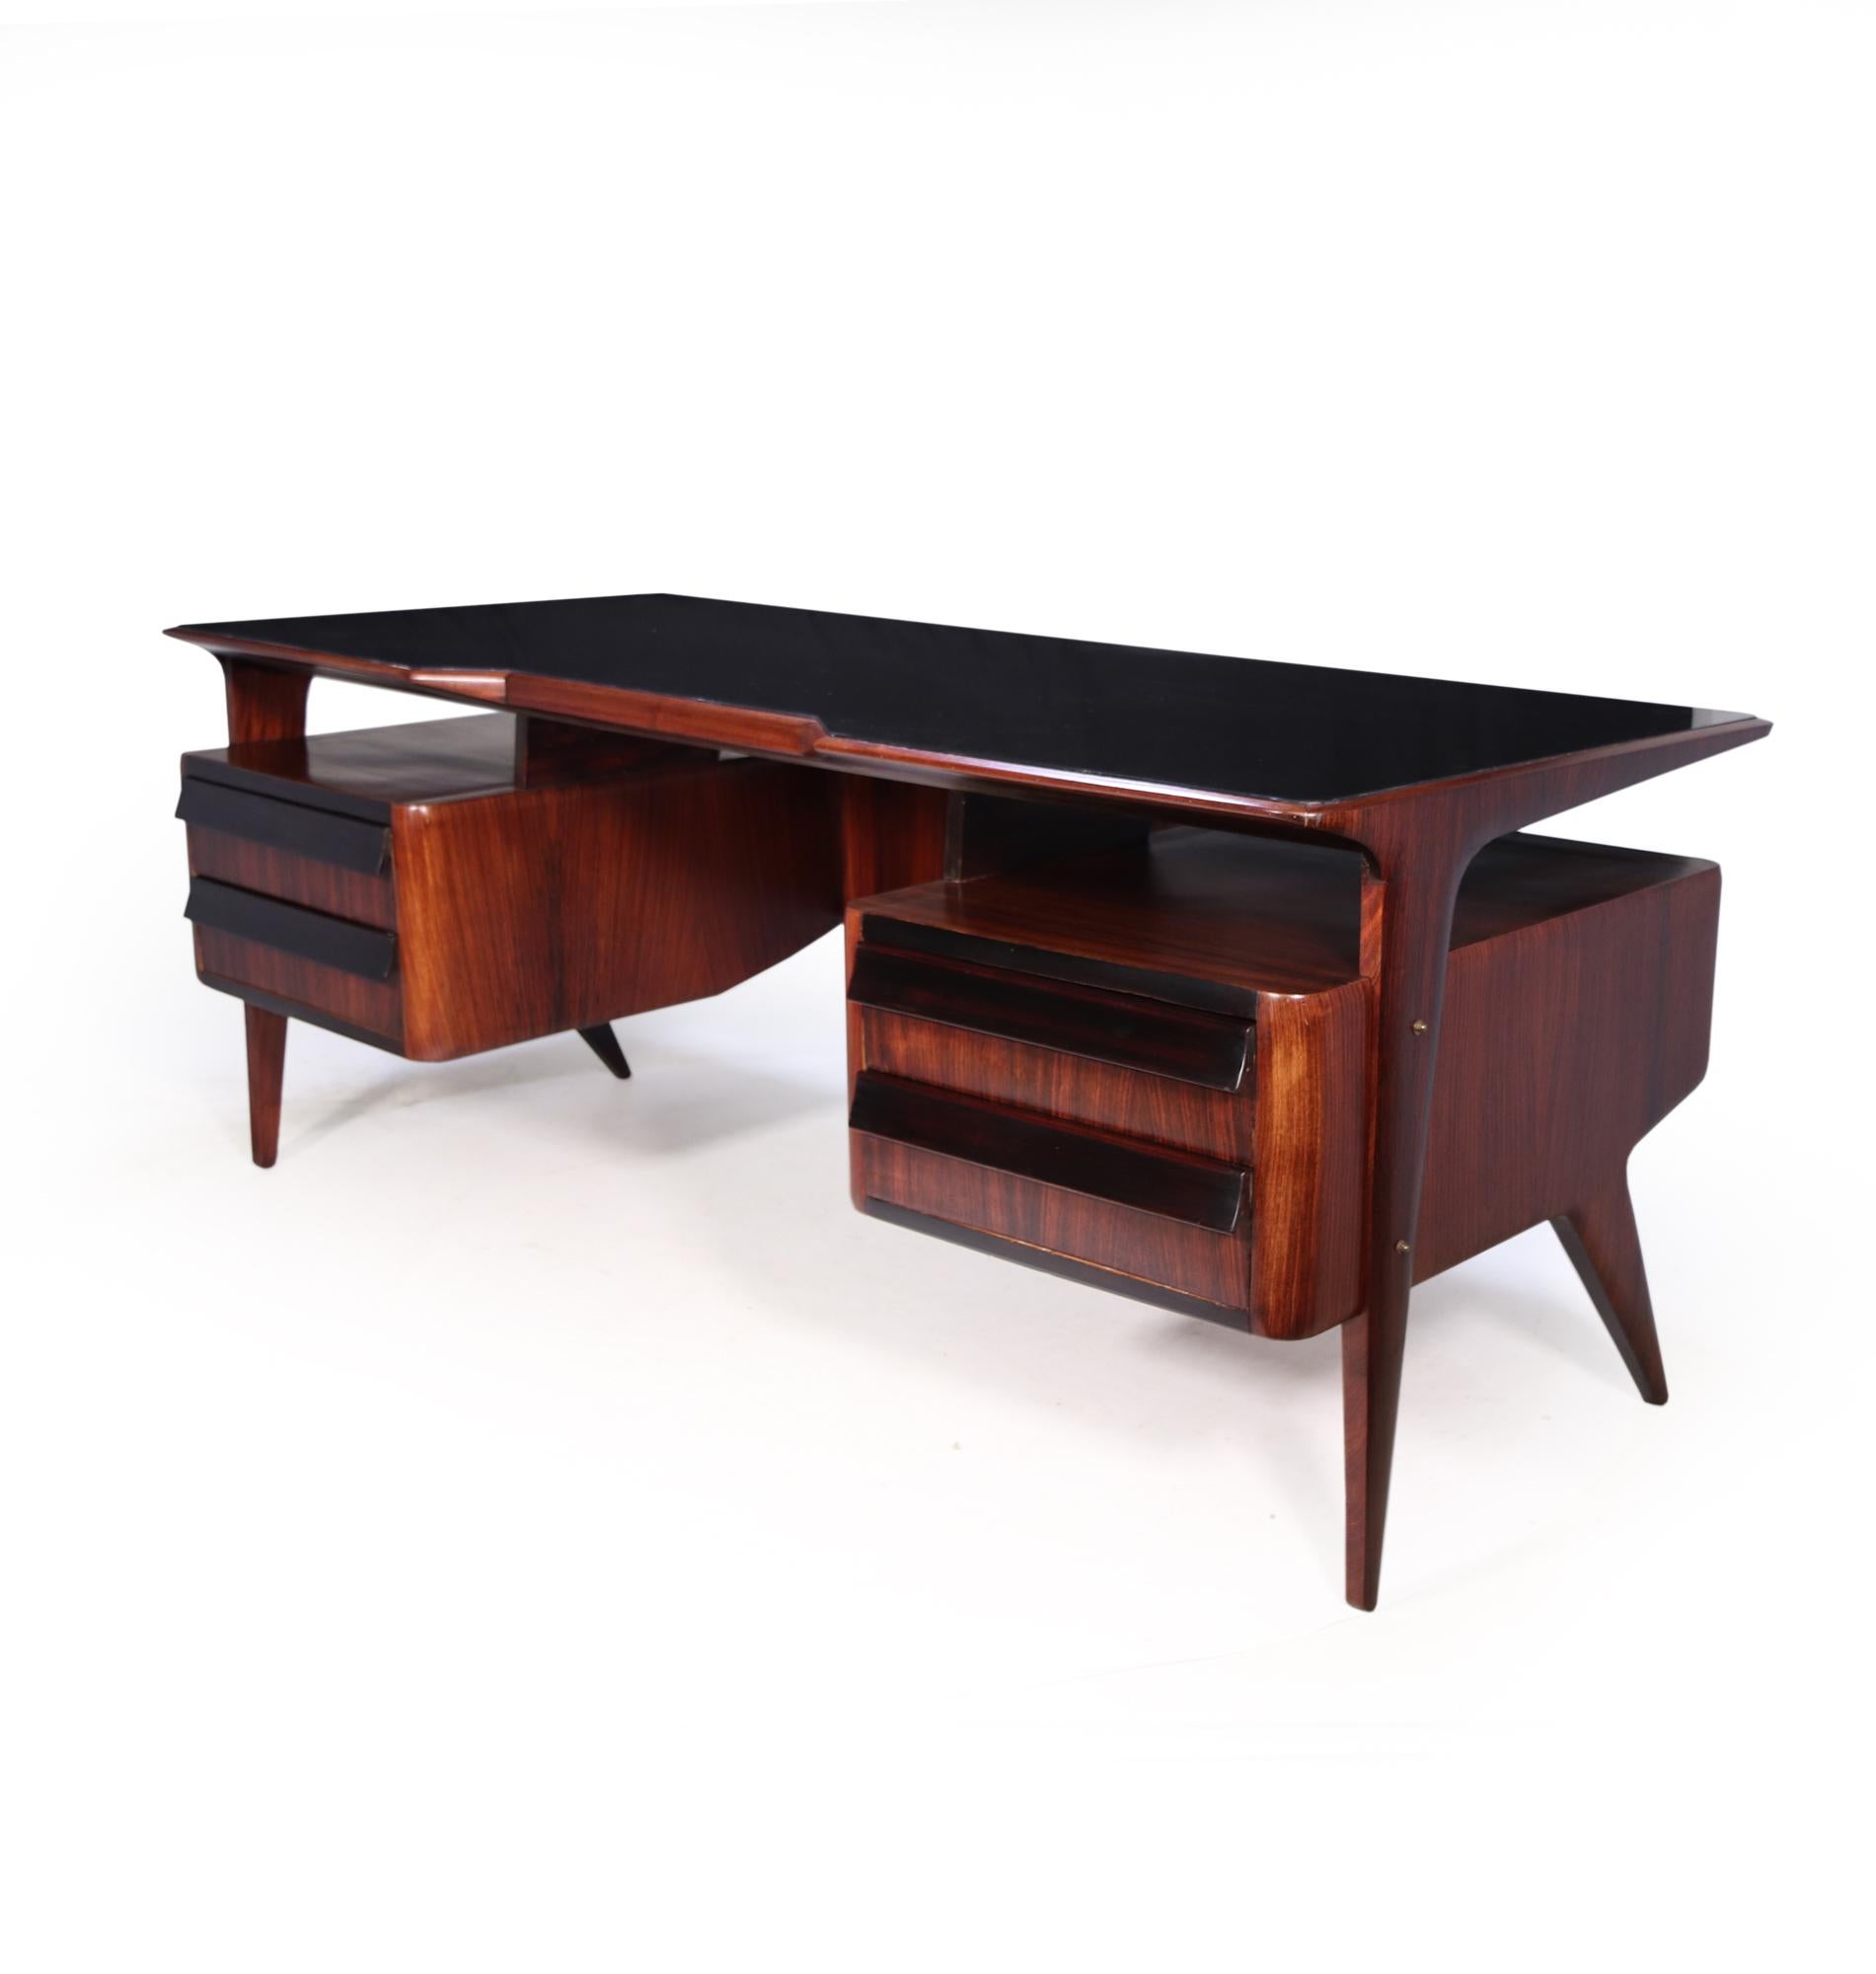 A stunning mid century executive Desk designed and produced in the 1950’s by Vittorio Dassi with four dovetail constructed drawers and shaped floating pedestal with black glass top

This desk has been restored where necessary and fully polished by